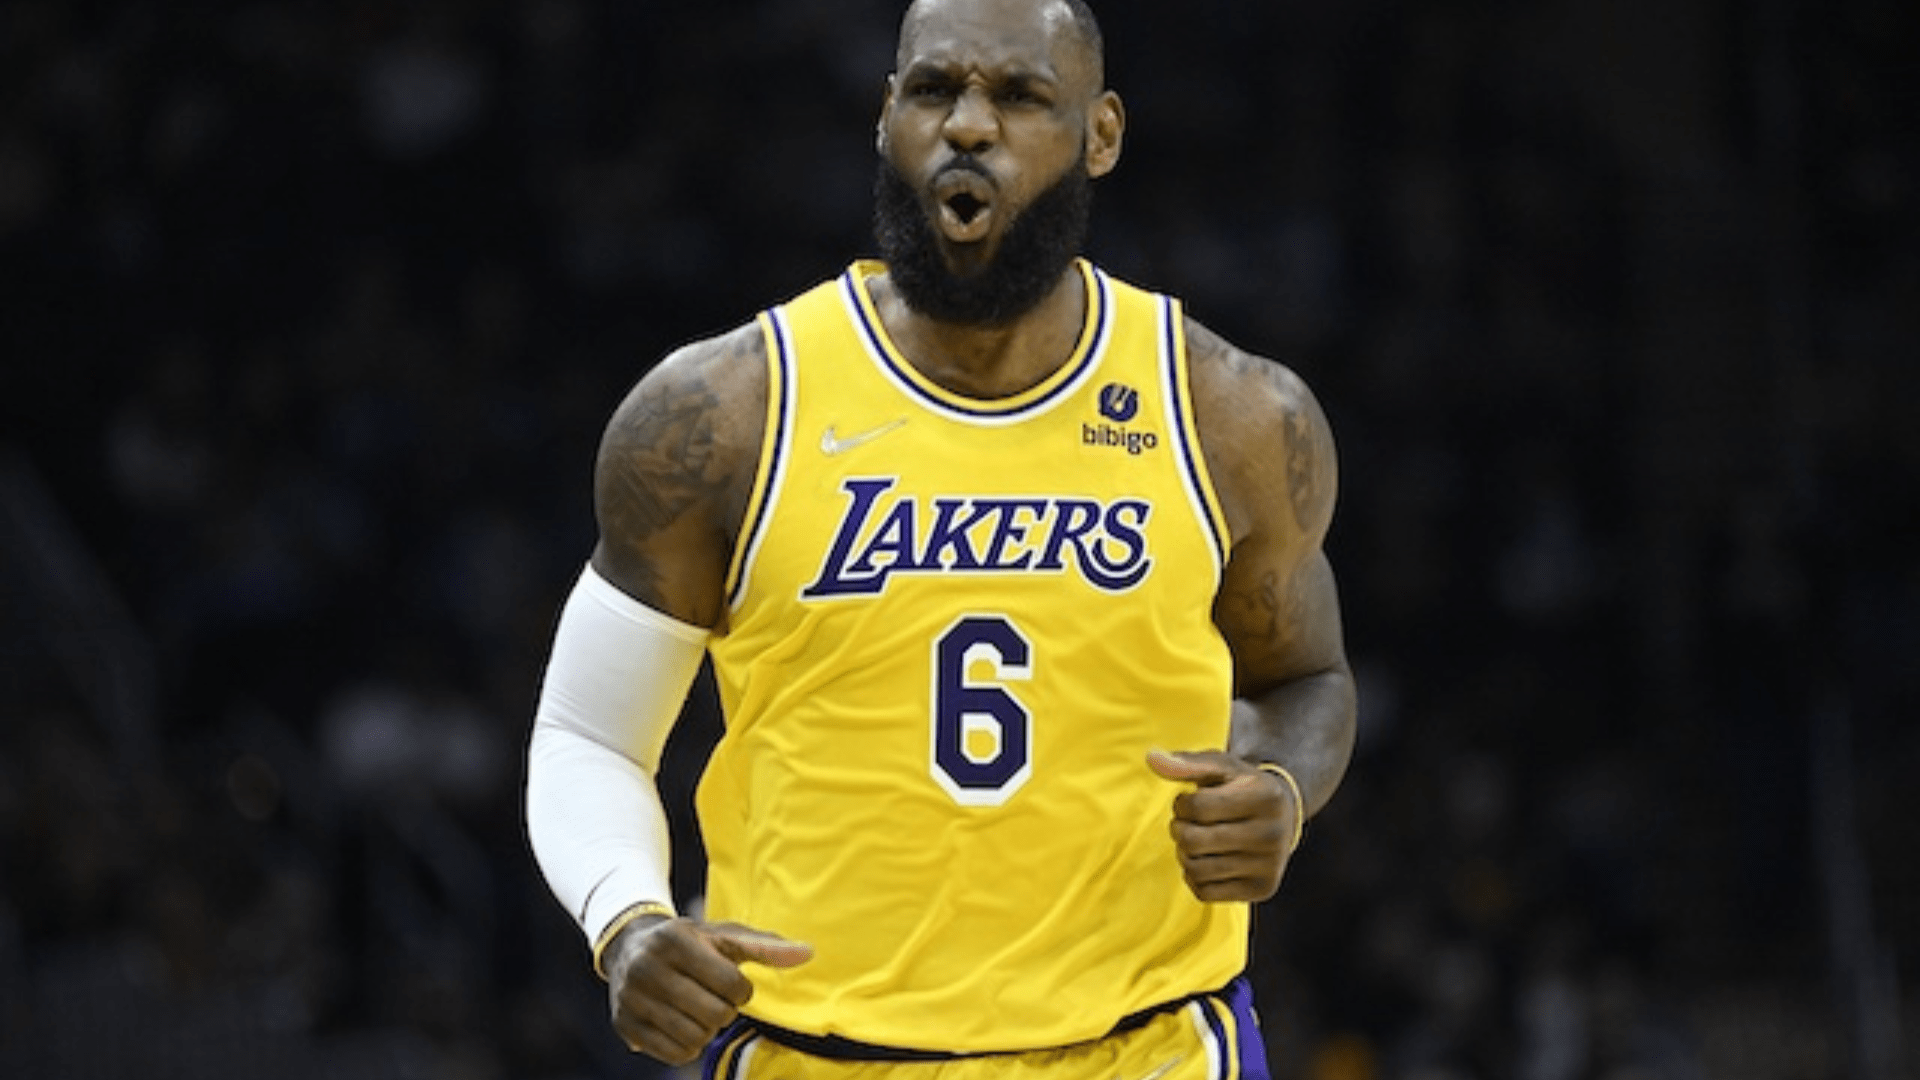 Lebron James 7 Best Investments That Made Him a Billionaire